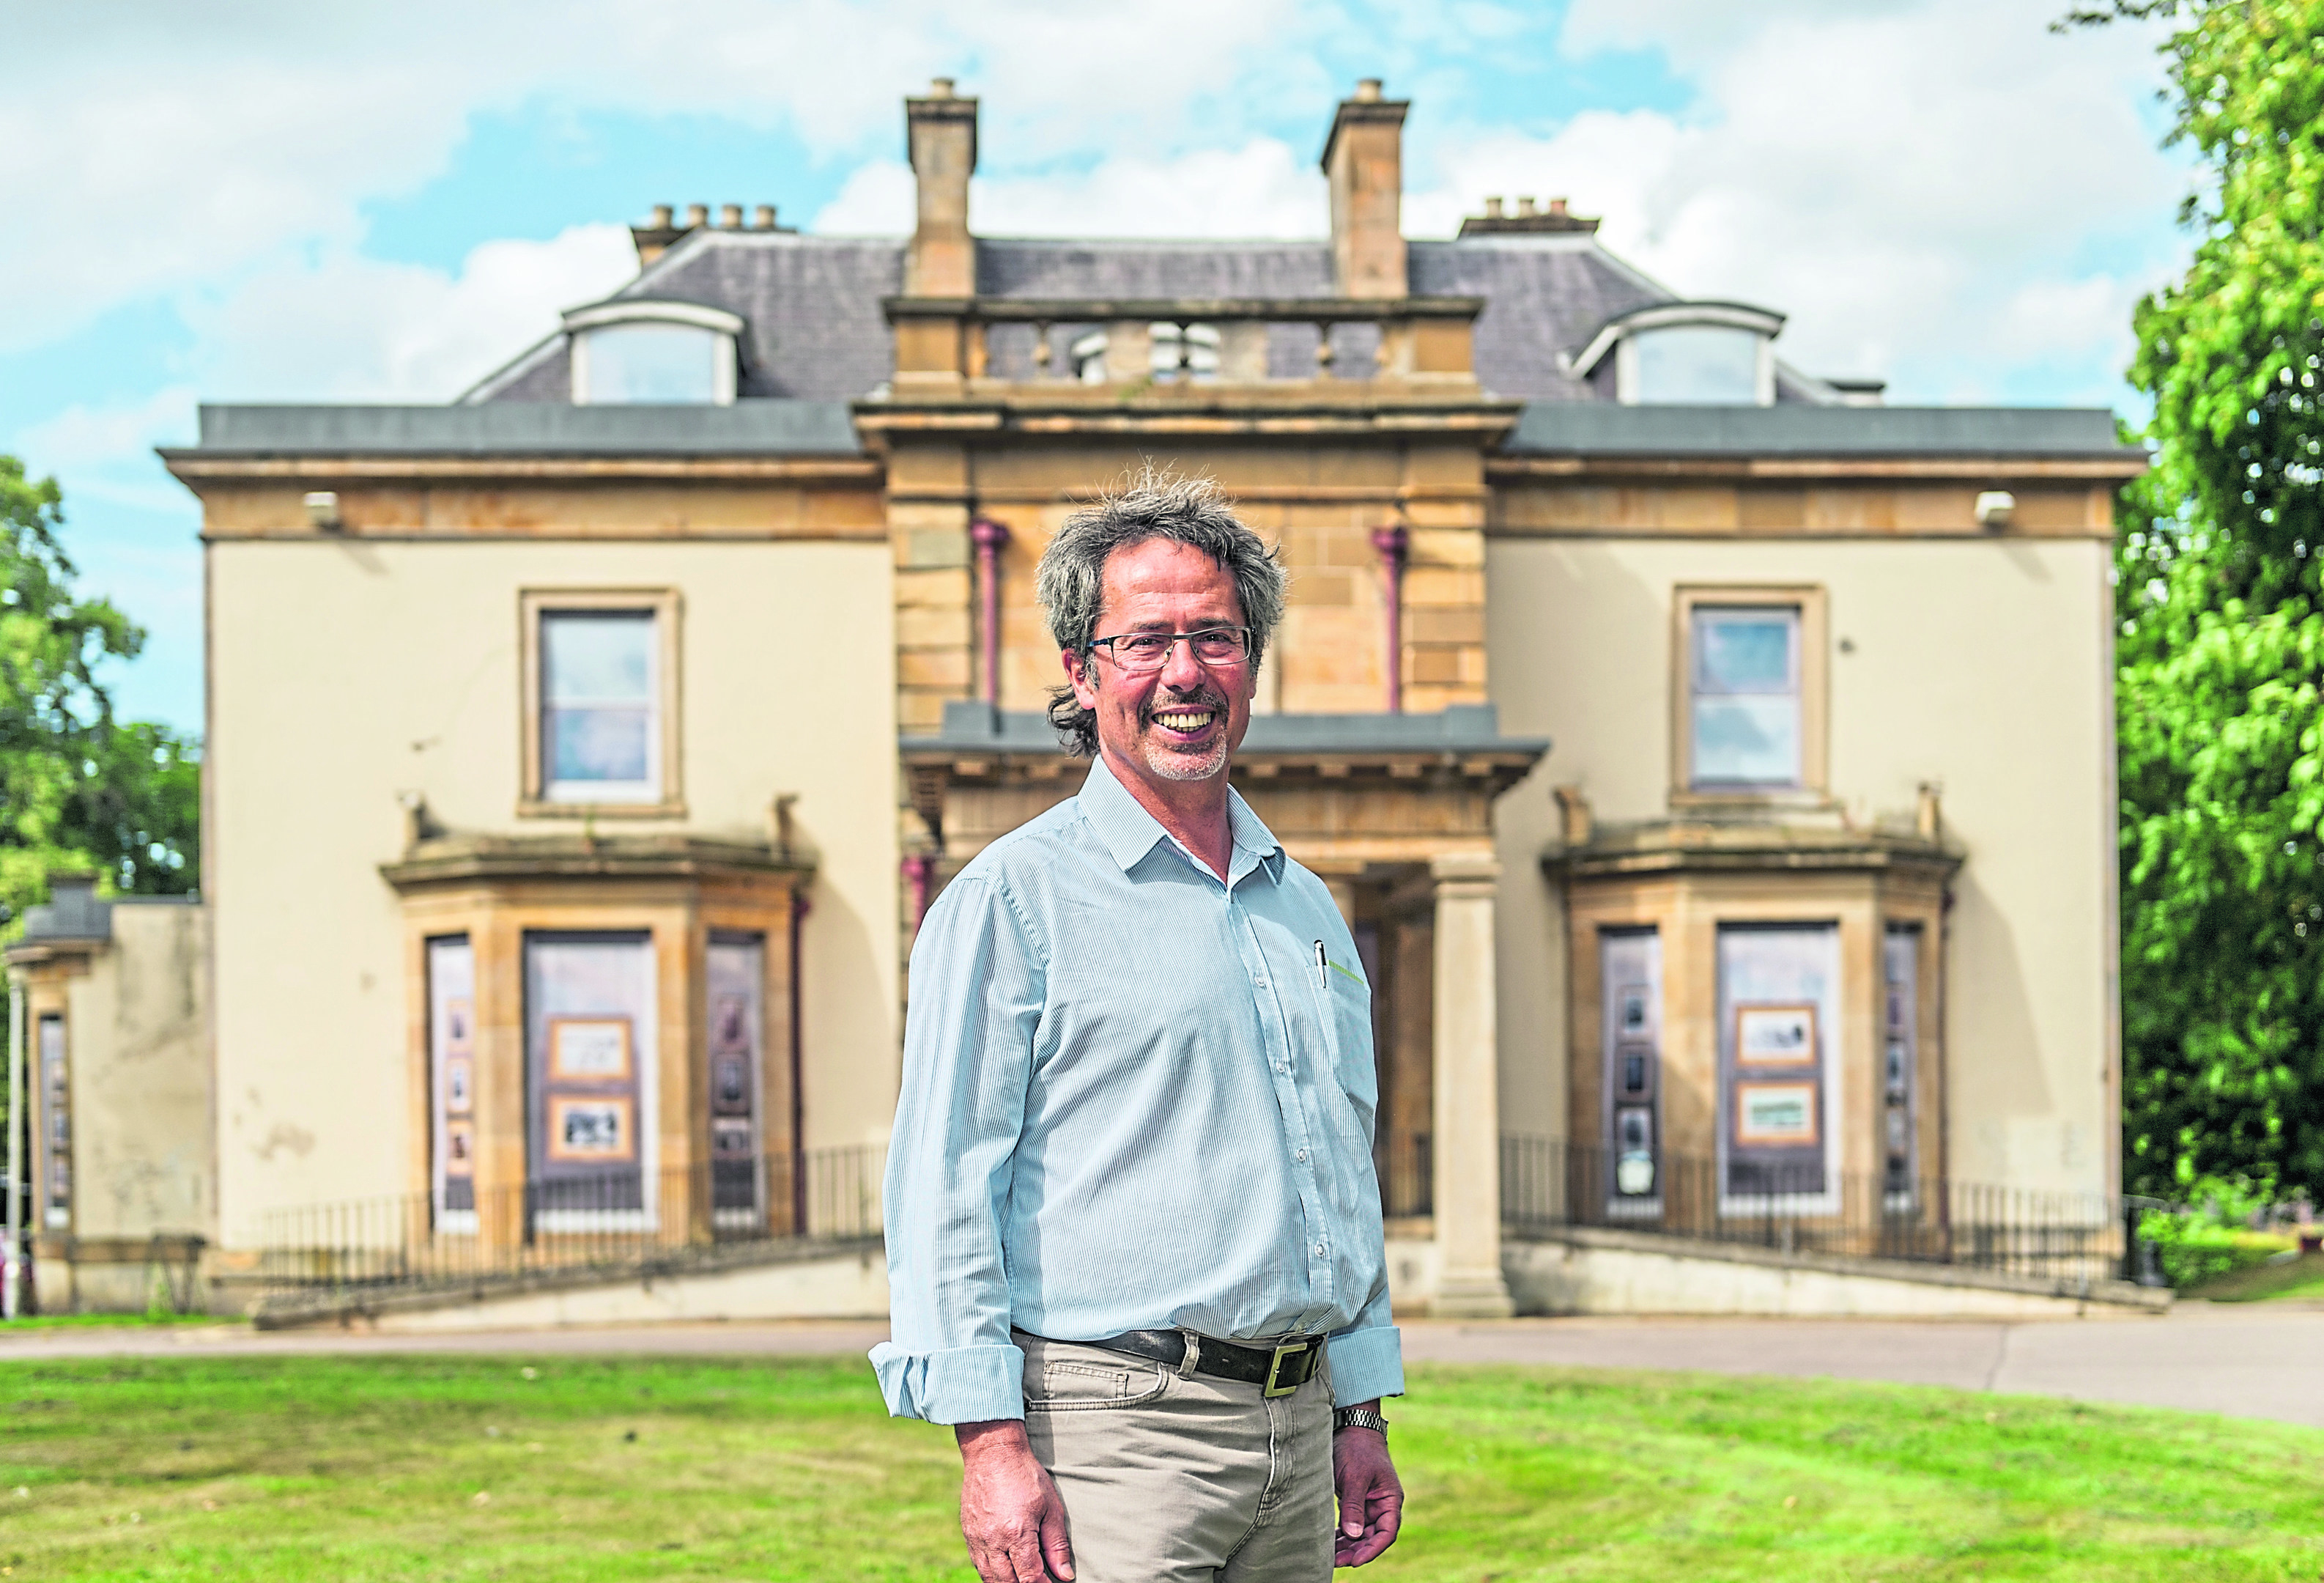 Fabio Villani (Chief Officer) at TSI Moray is pictured at Grant Lodge in Elgin, Moray.
Picture by Jason Hedges.